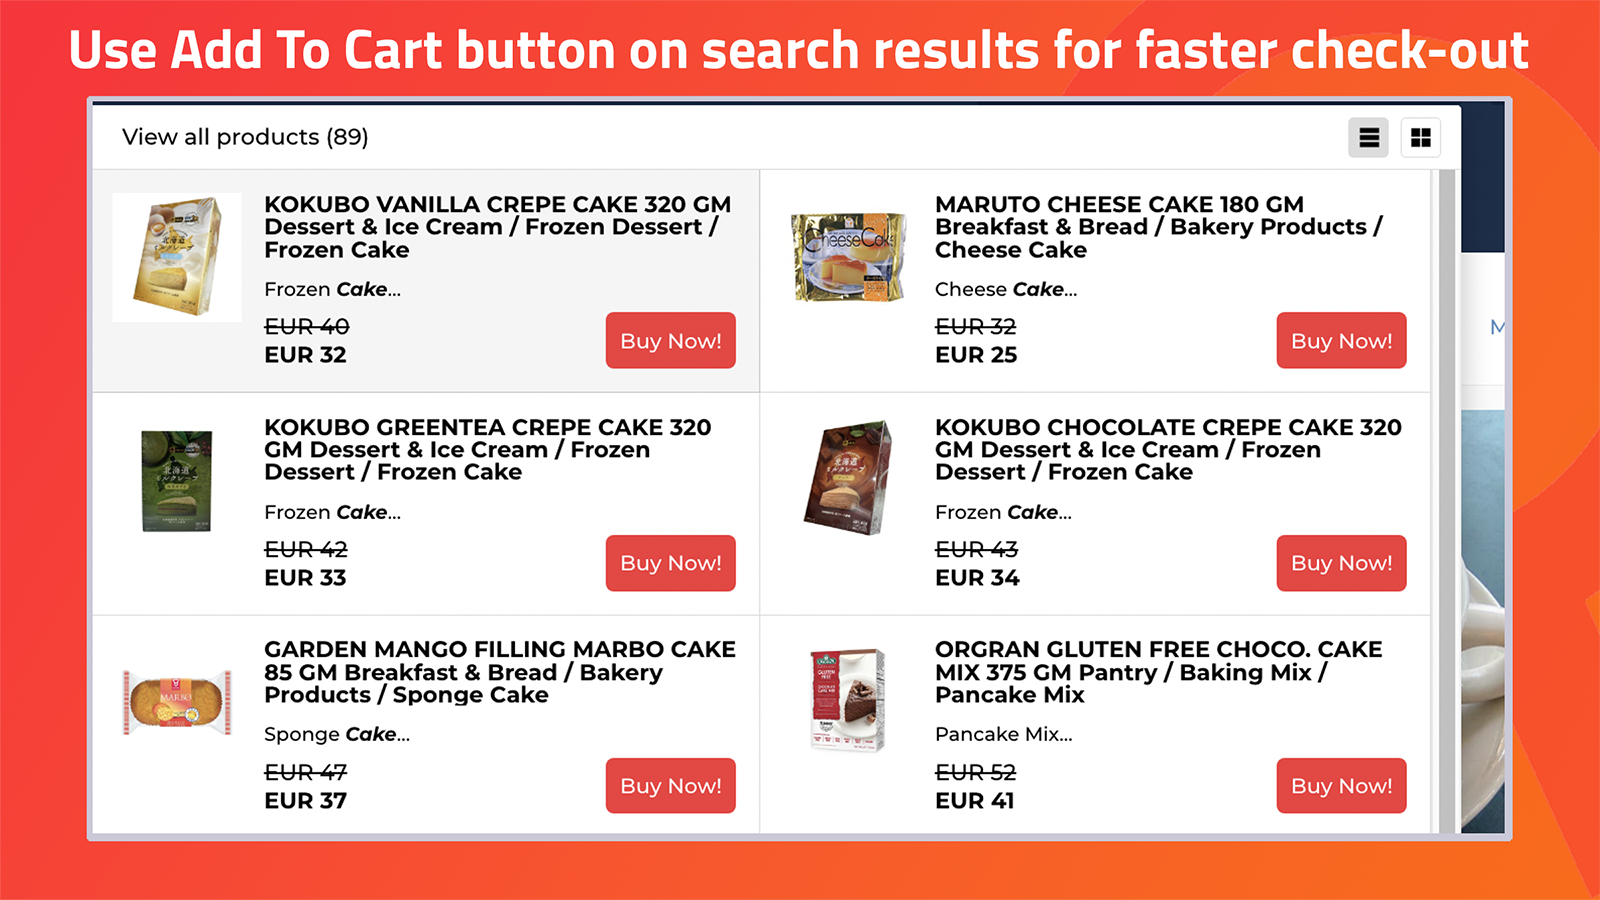 Use Add To Cart button on search results for faster check-out